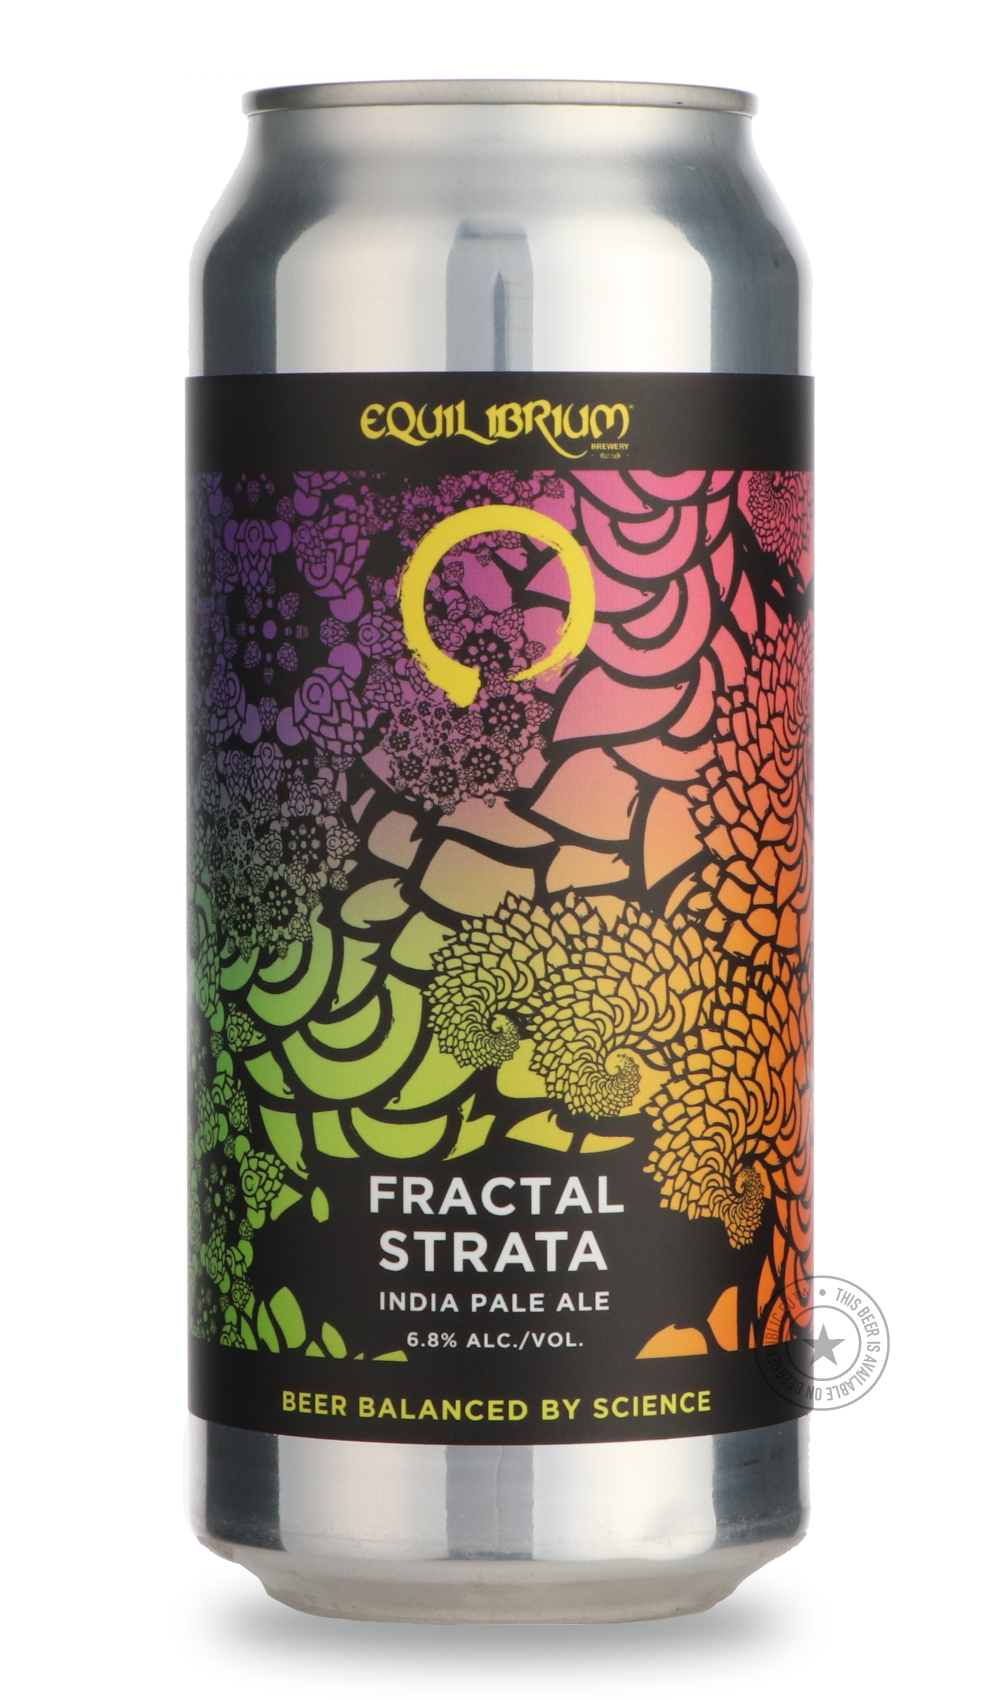 -Equilibrium- Fractal Strata-IPA- Only @ Beer Republic - The best online beer store for American & Canadian craft beer - Buy beer online from the USA and Canada - Bier online kopen - Amerikaans bier kopen - Craft beer store - Craft beer kopen - Amerikanisch bier kaufen - Bier online kaufen - Acheter biere online - IPA - Stout - Porter - New England IPA - Hazy IPA - Imperial Stout - Barrel Aged - Barrel Aged Imperial Stout - Brown - Dark beer - Blond - Blonde - Pilsner - Lager - Wheat - Weizen - Amber - Barl